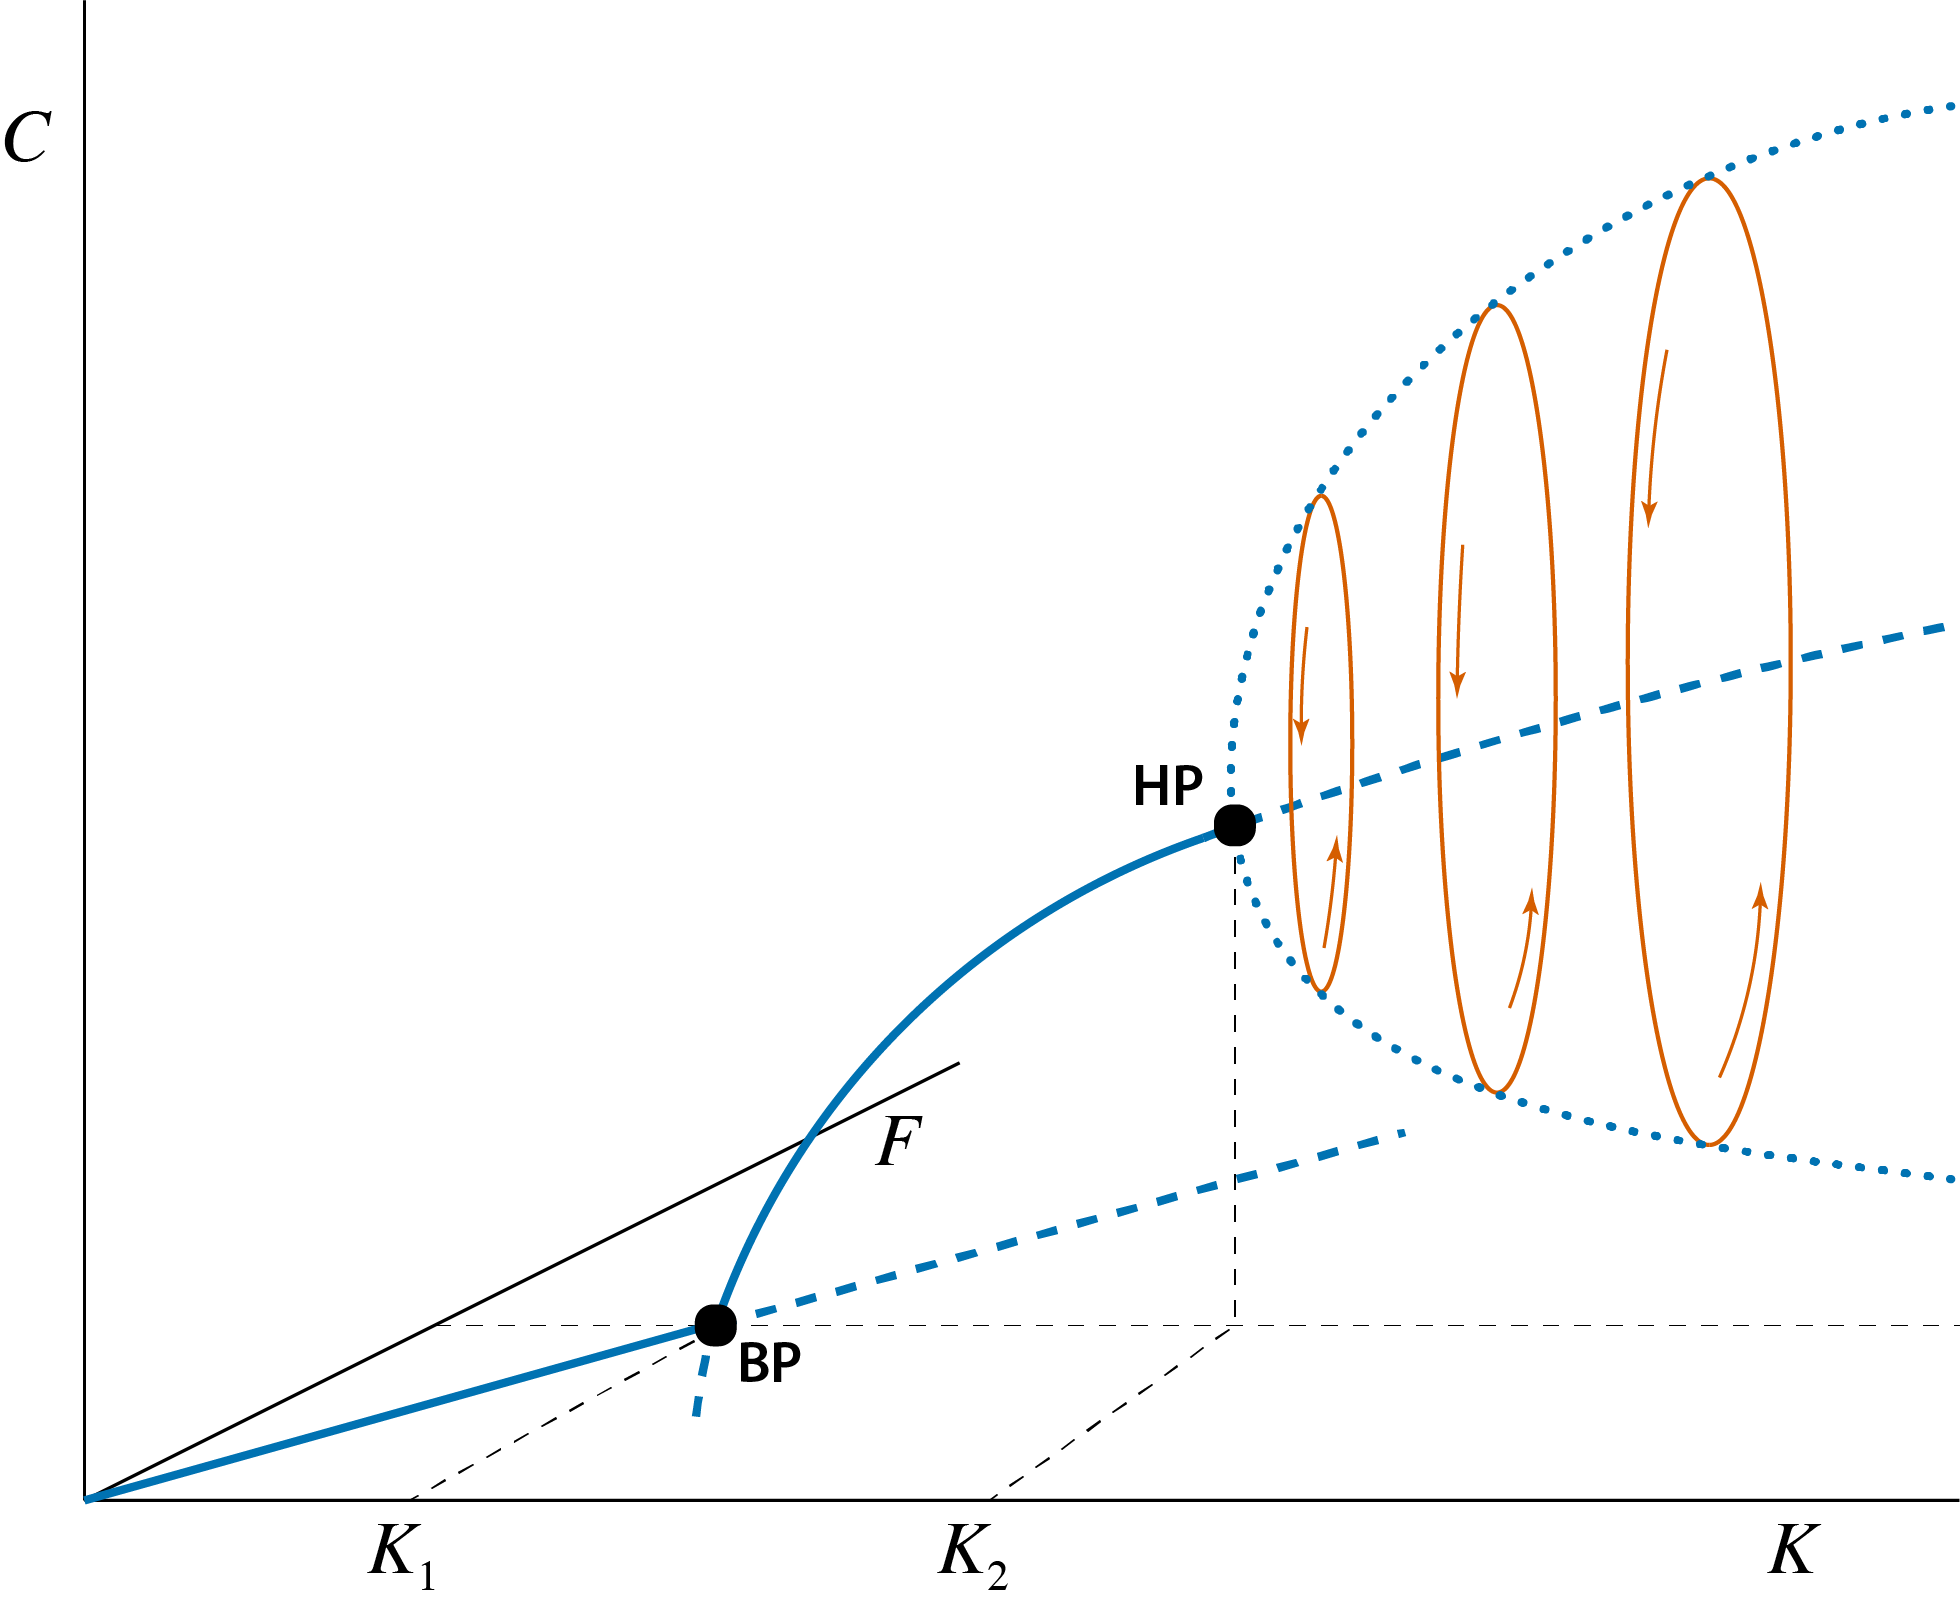 Bifurcation graph of the predator-prey model, showing the steady state values of prey $\tilde{F}$ and predator $\tilde{C}$ as a function of the model parameter $K$ representing the prey carrying capacity. Curve sections representing unstable steady states are indicated with dashed lines, curve sections representing stable steady states are indicated with solid lines. The special point indicated with 'BP', occurring at $K=K_1$ is the branching point or transcritical bifurcation point, above which predators can persist. The special point indicated with 'HP' occurring at $K=K_2$ is the Hopf bifurcation point at which the predator-prey equilibrium changes form stable to unstable and a limit cycle emerges. With increasing values of $K$ these limit cycles increase in amplitude. The thick dotted line indicates the amplitude of these cycles in the predator abundance. The three ellipse-shaped closed curves illustrate this limit cycle in both prey and predator density with thin arrows inidcating the direction of rotation.